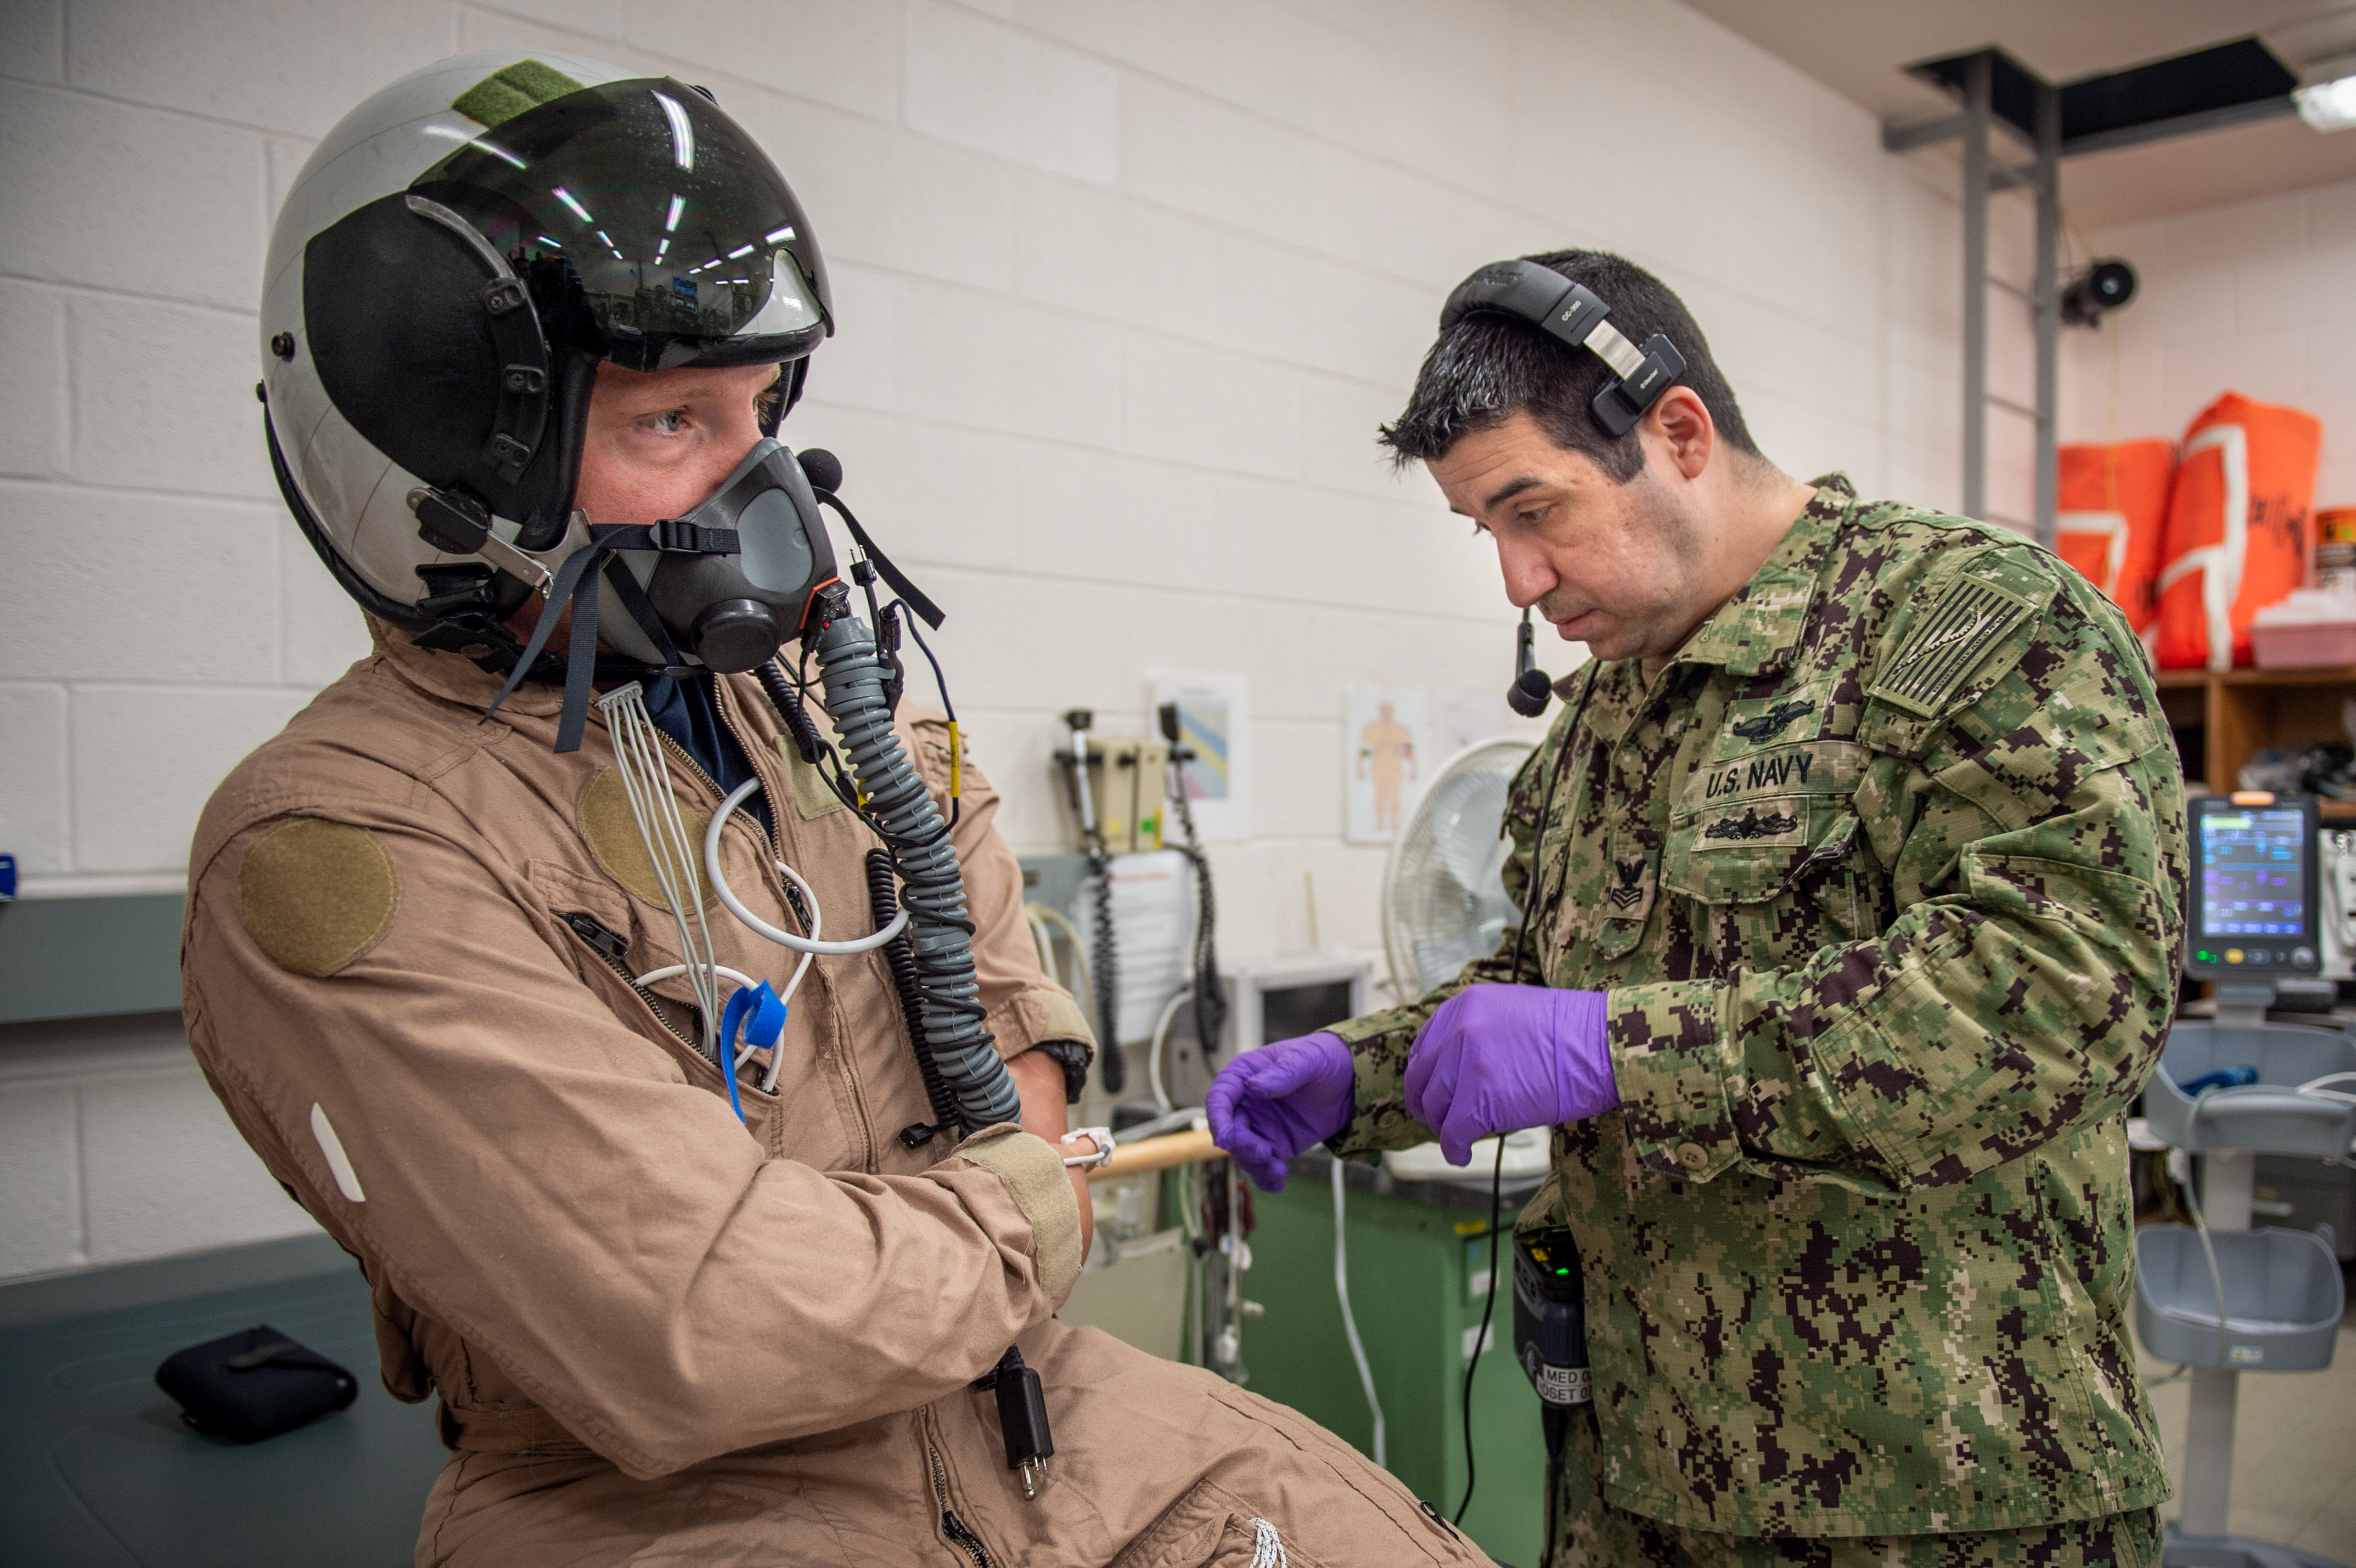 NAVAL AIR STATION PATUXENT RIVER, Md. (July 26, 2021) Lt. Cmdr. Micah Kinney, left, prepares for testing under the medical supervision of Hospital Corpsman 1st Class Sergio Rodriguez in the Environmental Physiology and Human Performance lab at Naval Air Warfare Center Aircraft Division (NAWCAD). (U.S. Navy photo by Mass Communication Specialist 3rd Class  Chanel L. Turner)